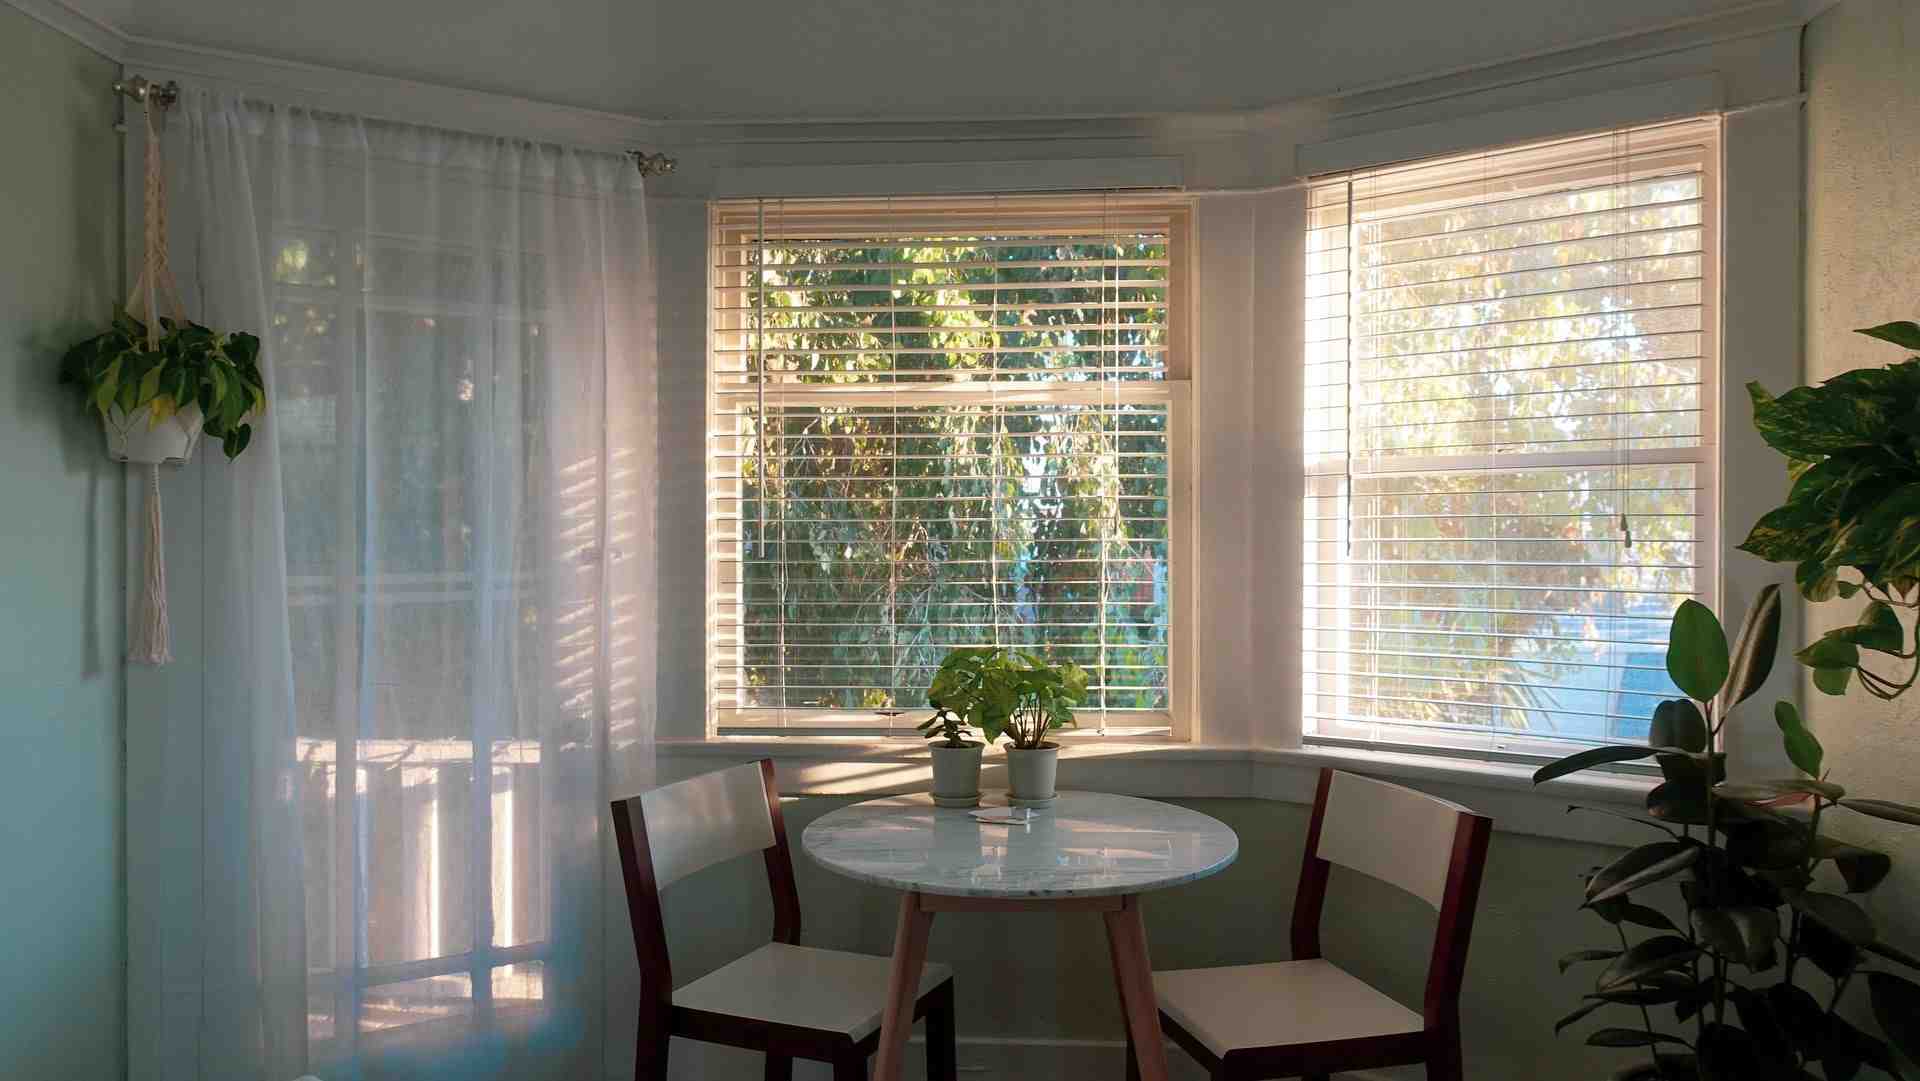 Breakfast nook with a bay windows and white blinds